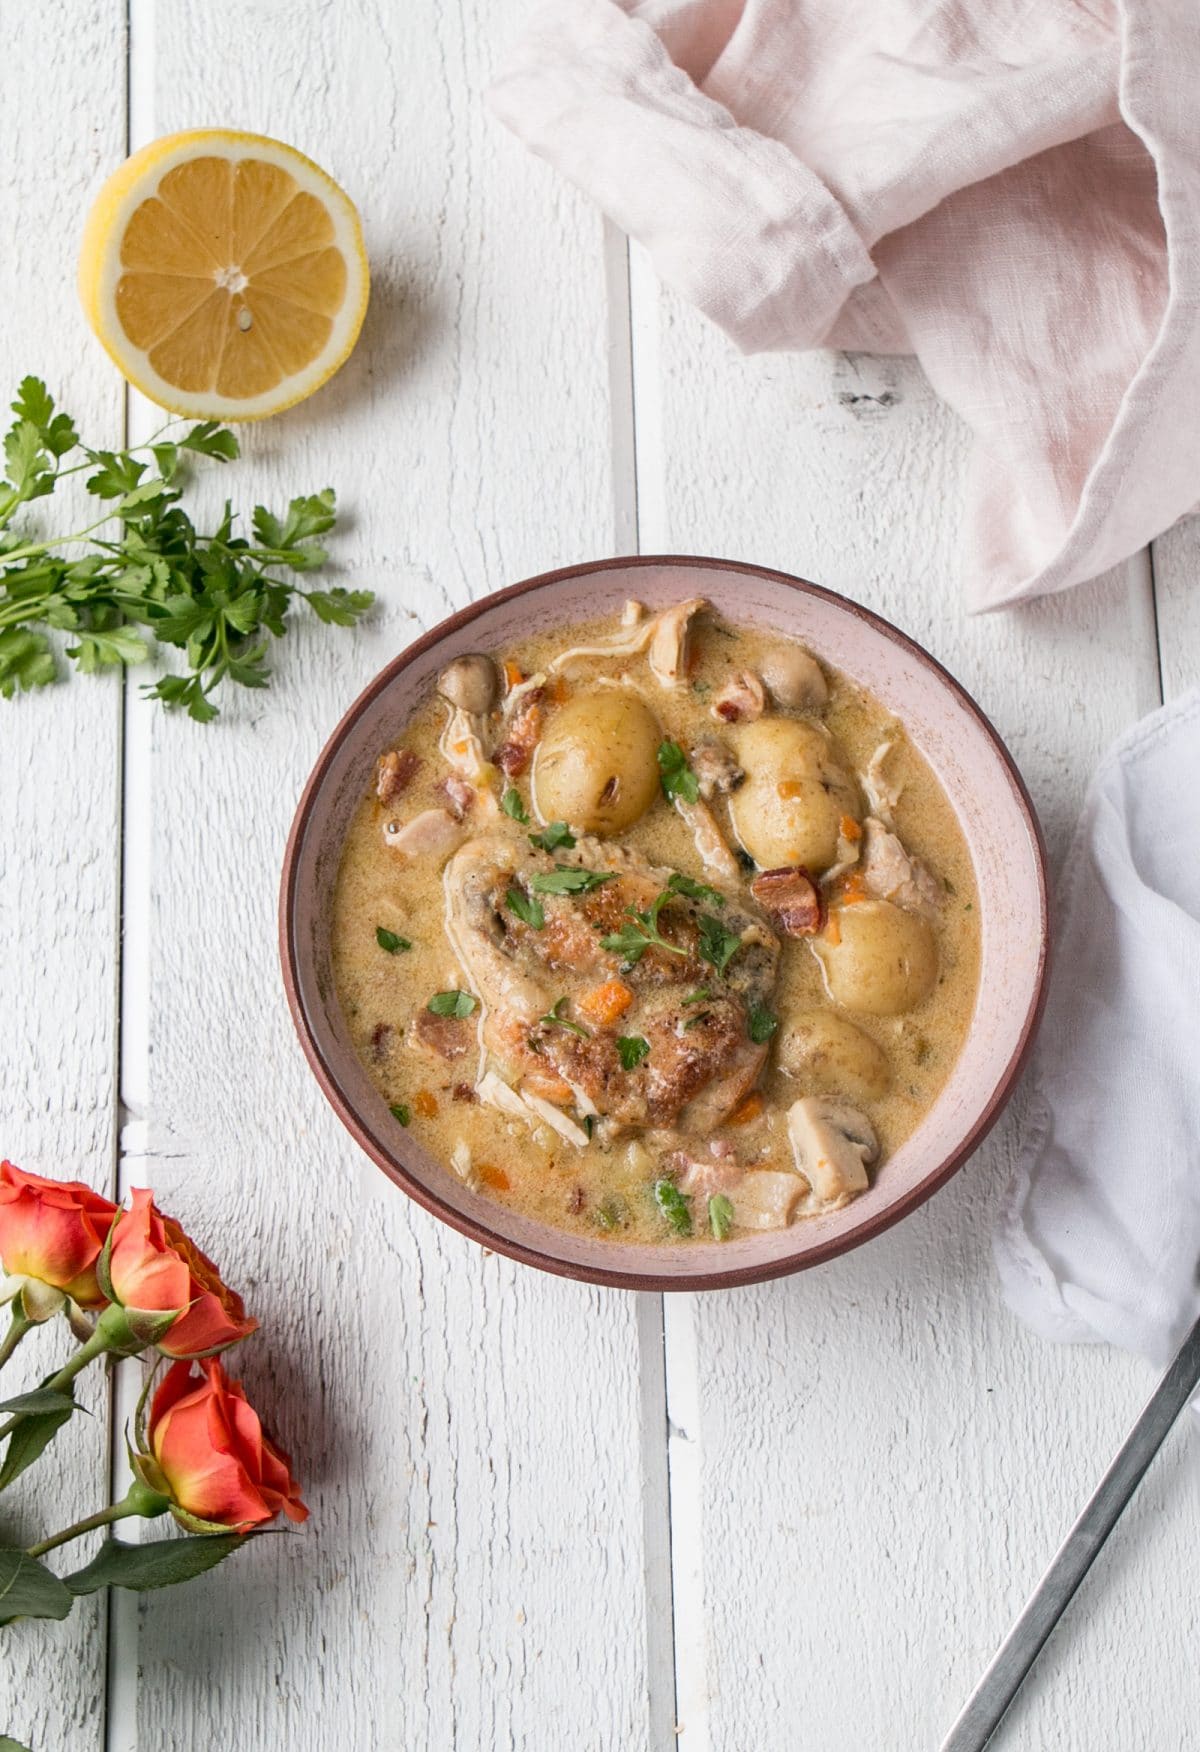 Instant Pot Chicken Fricassee is a classic French Chicken Stew made easy and quick thanks to the Instant Pot! #chicken #stew #instantpot